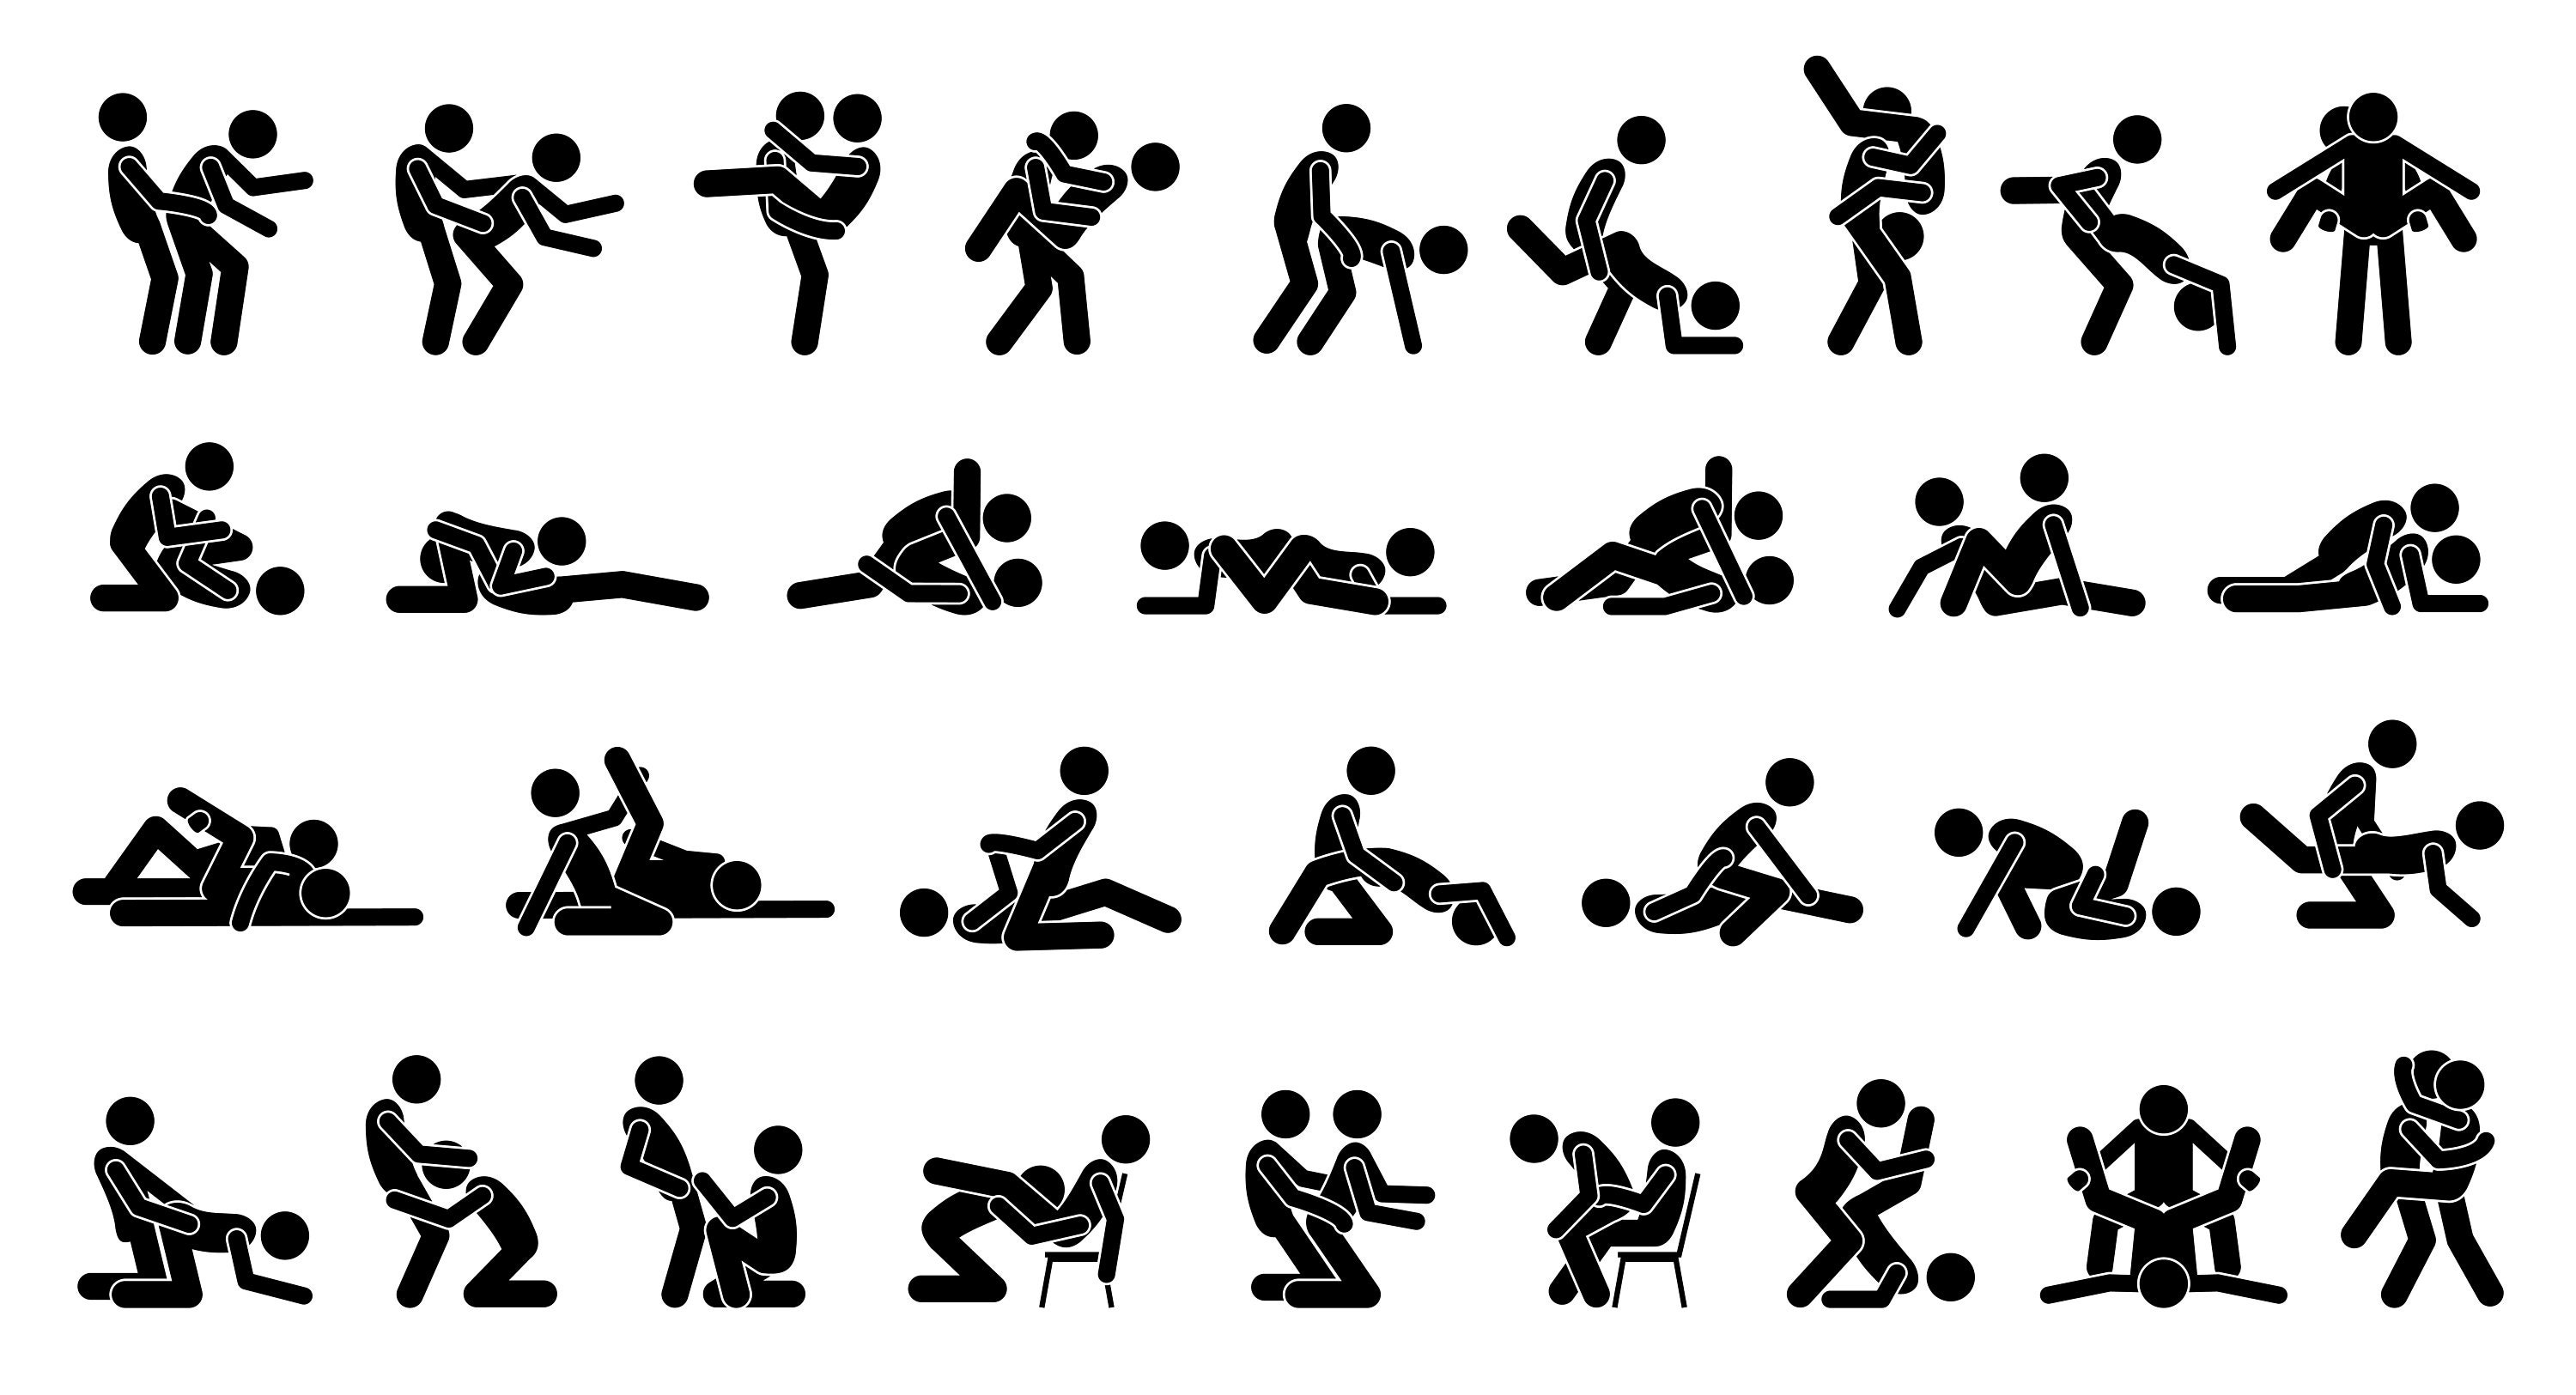 Free kama sutra sex position guide